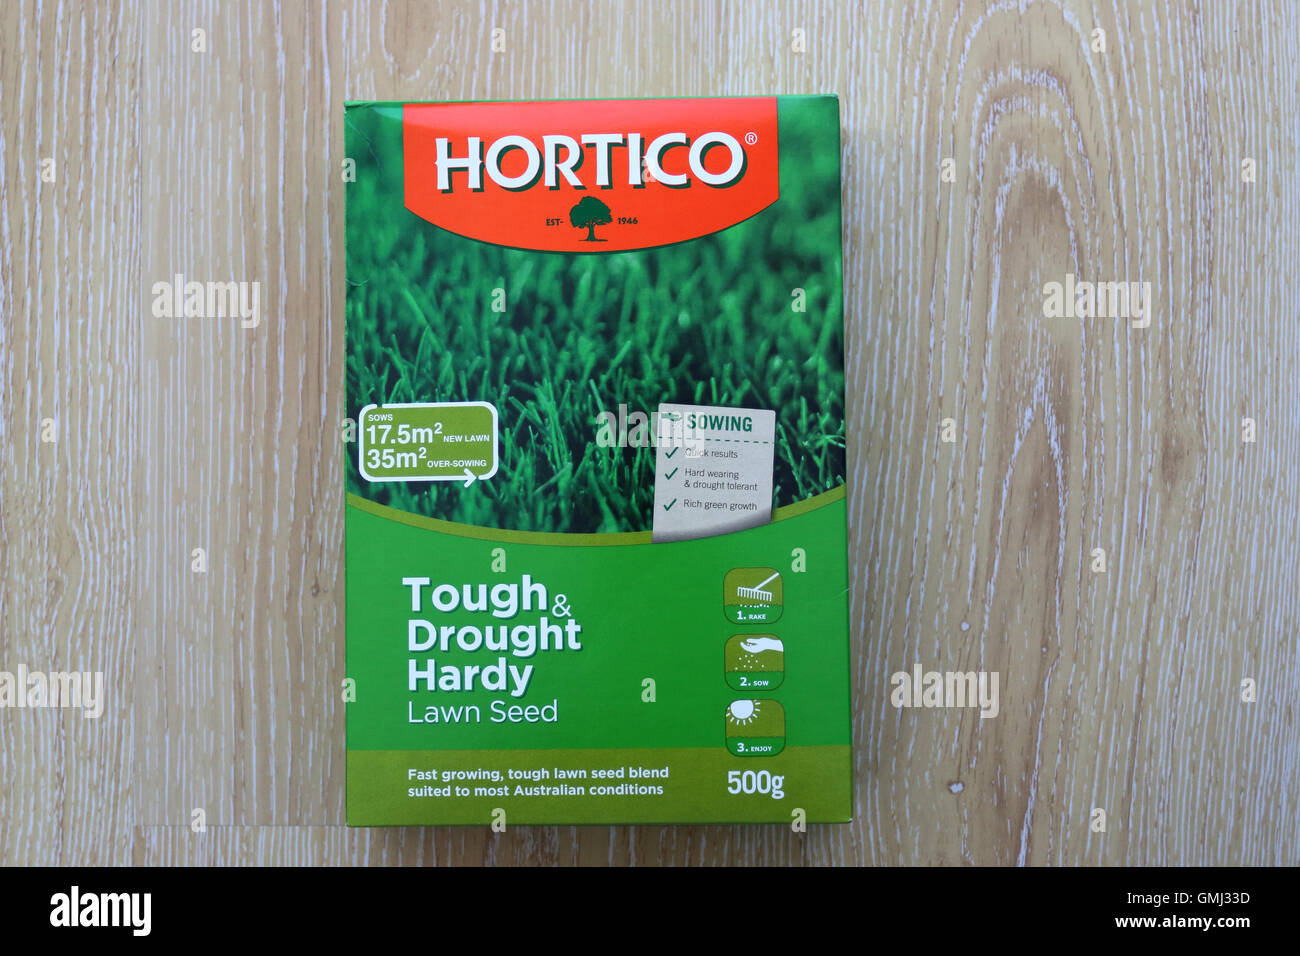 Hortico grass seeds in a box Stock Photo